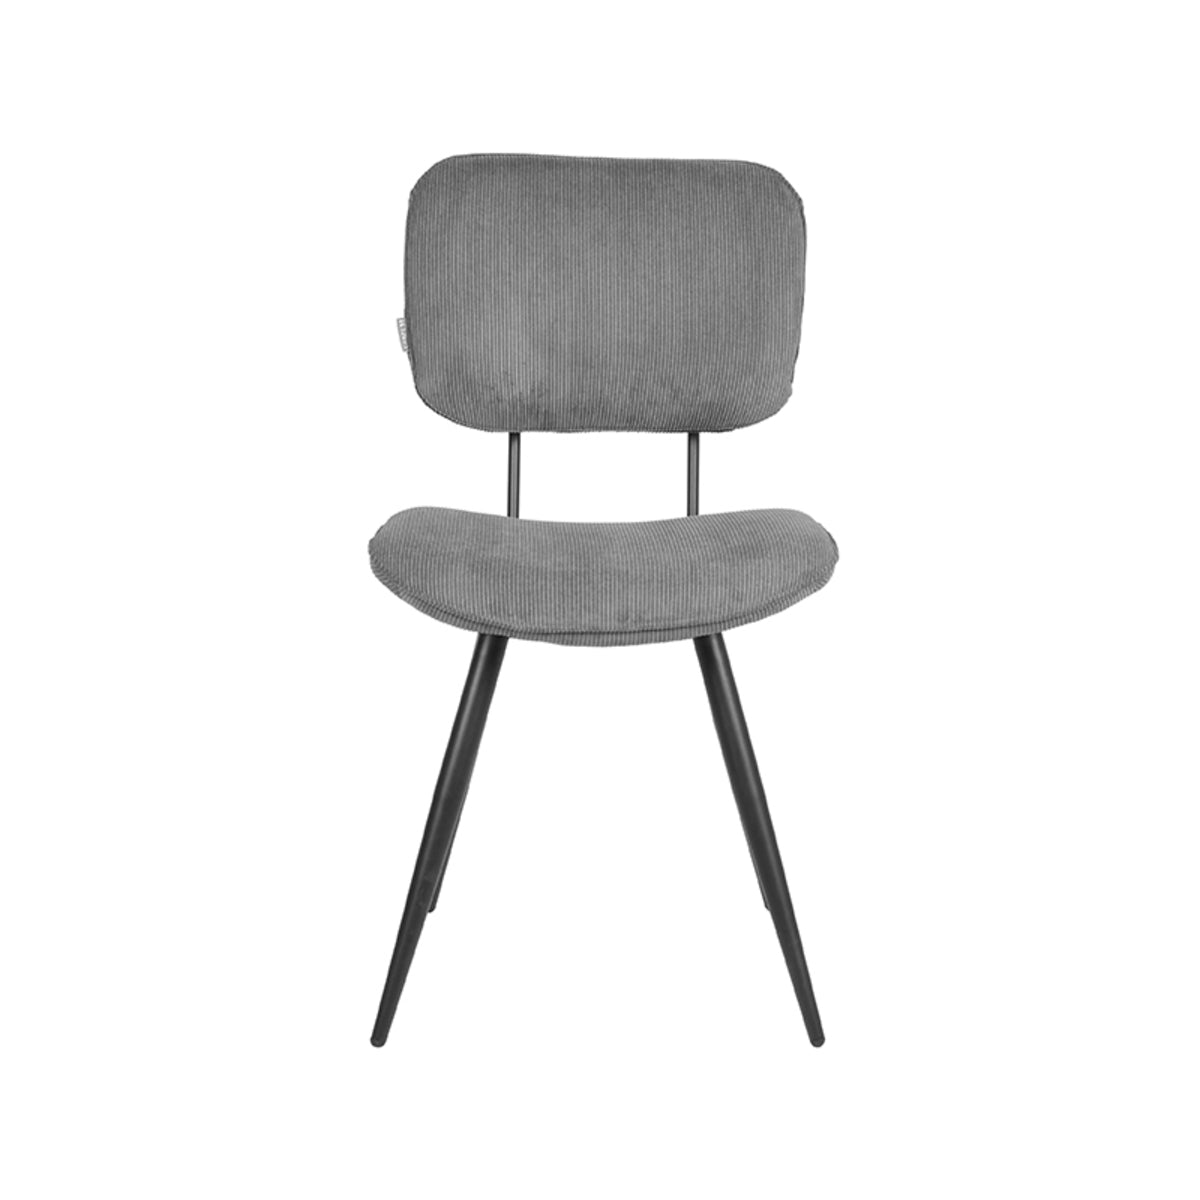 LABEL51 Dining room chair Vic - Dark gray - Ribcord | 2 pieces